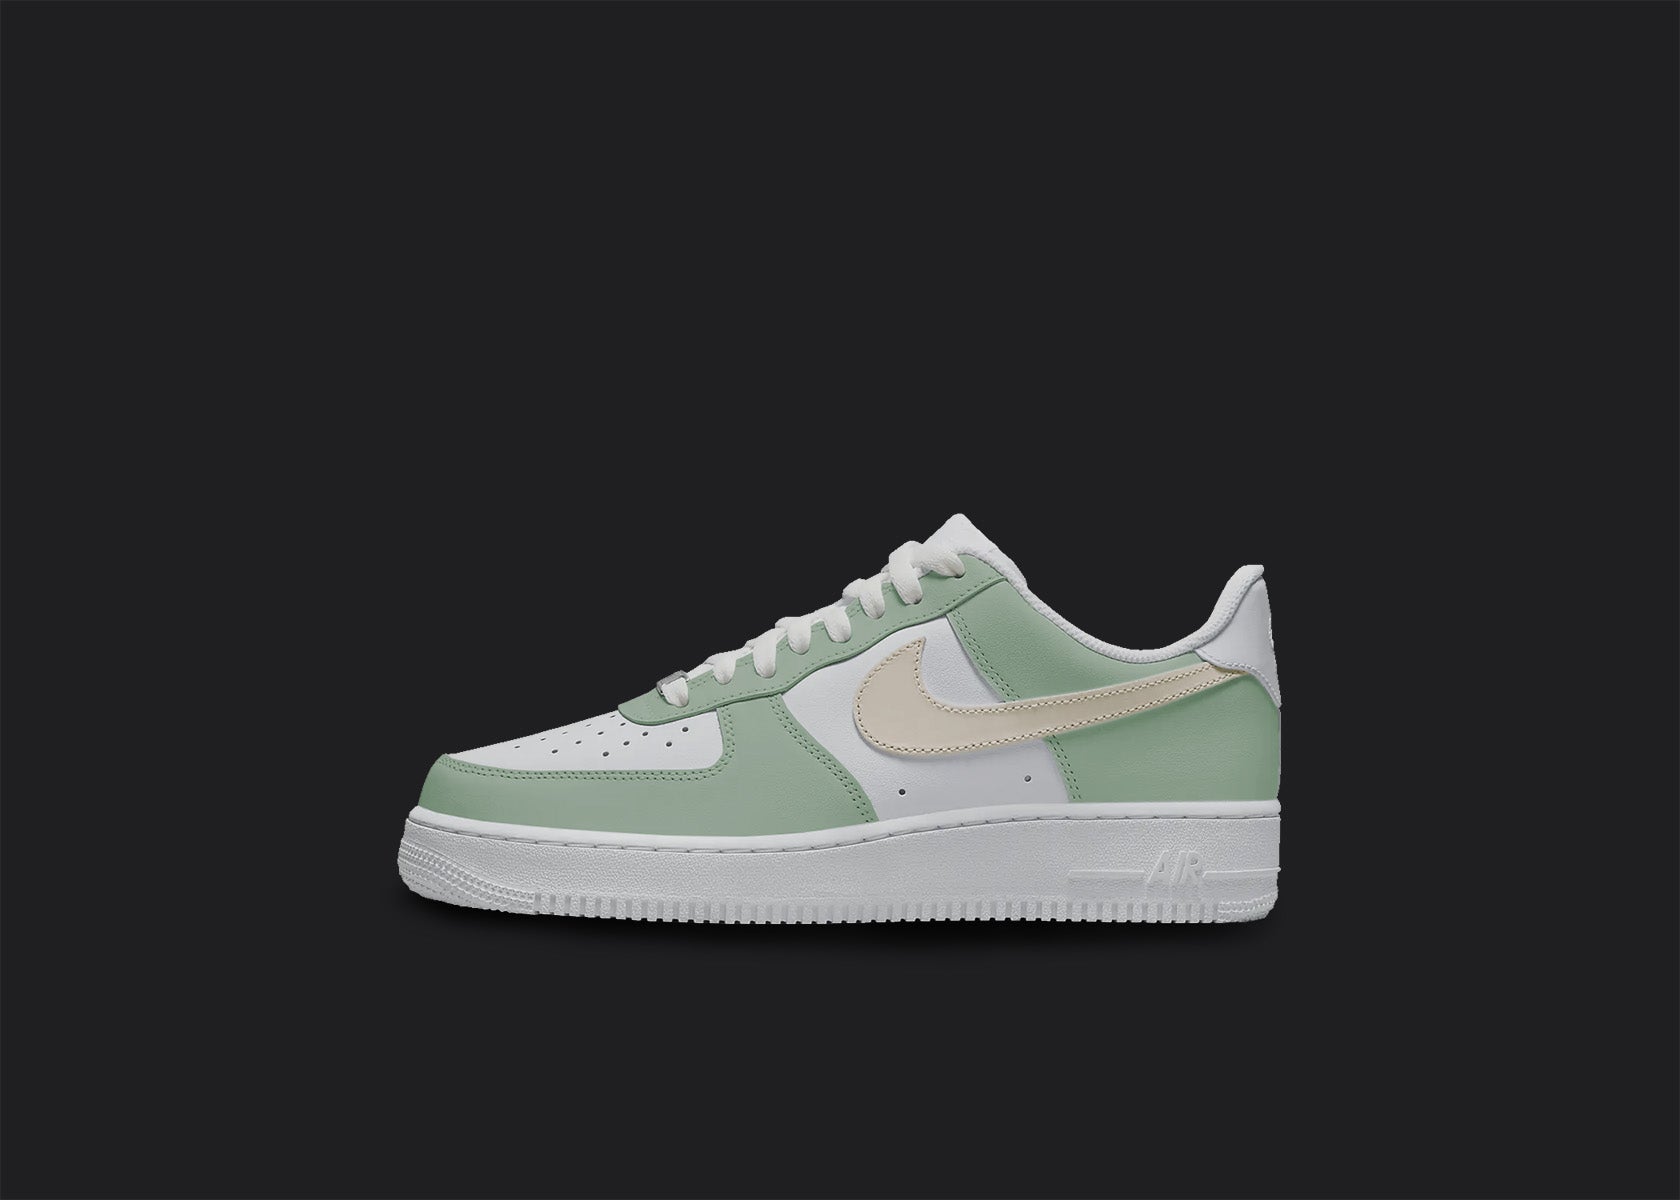 The image is of a Custom Nike Air force 1 sneaker on a blank black background. The white custom sneaker has a Green and beige pastel colorway design.